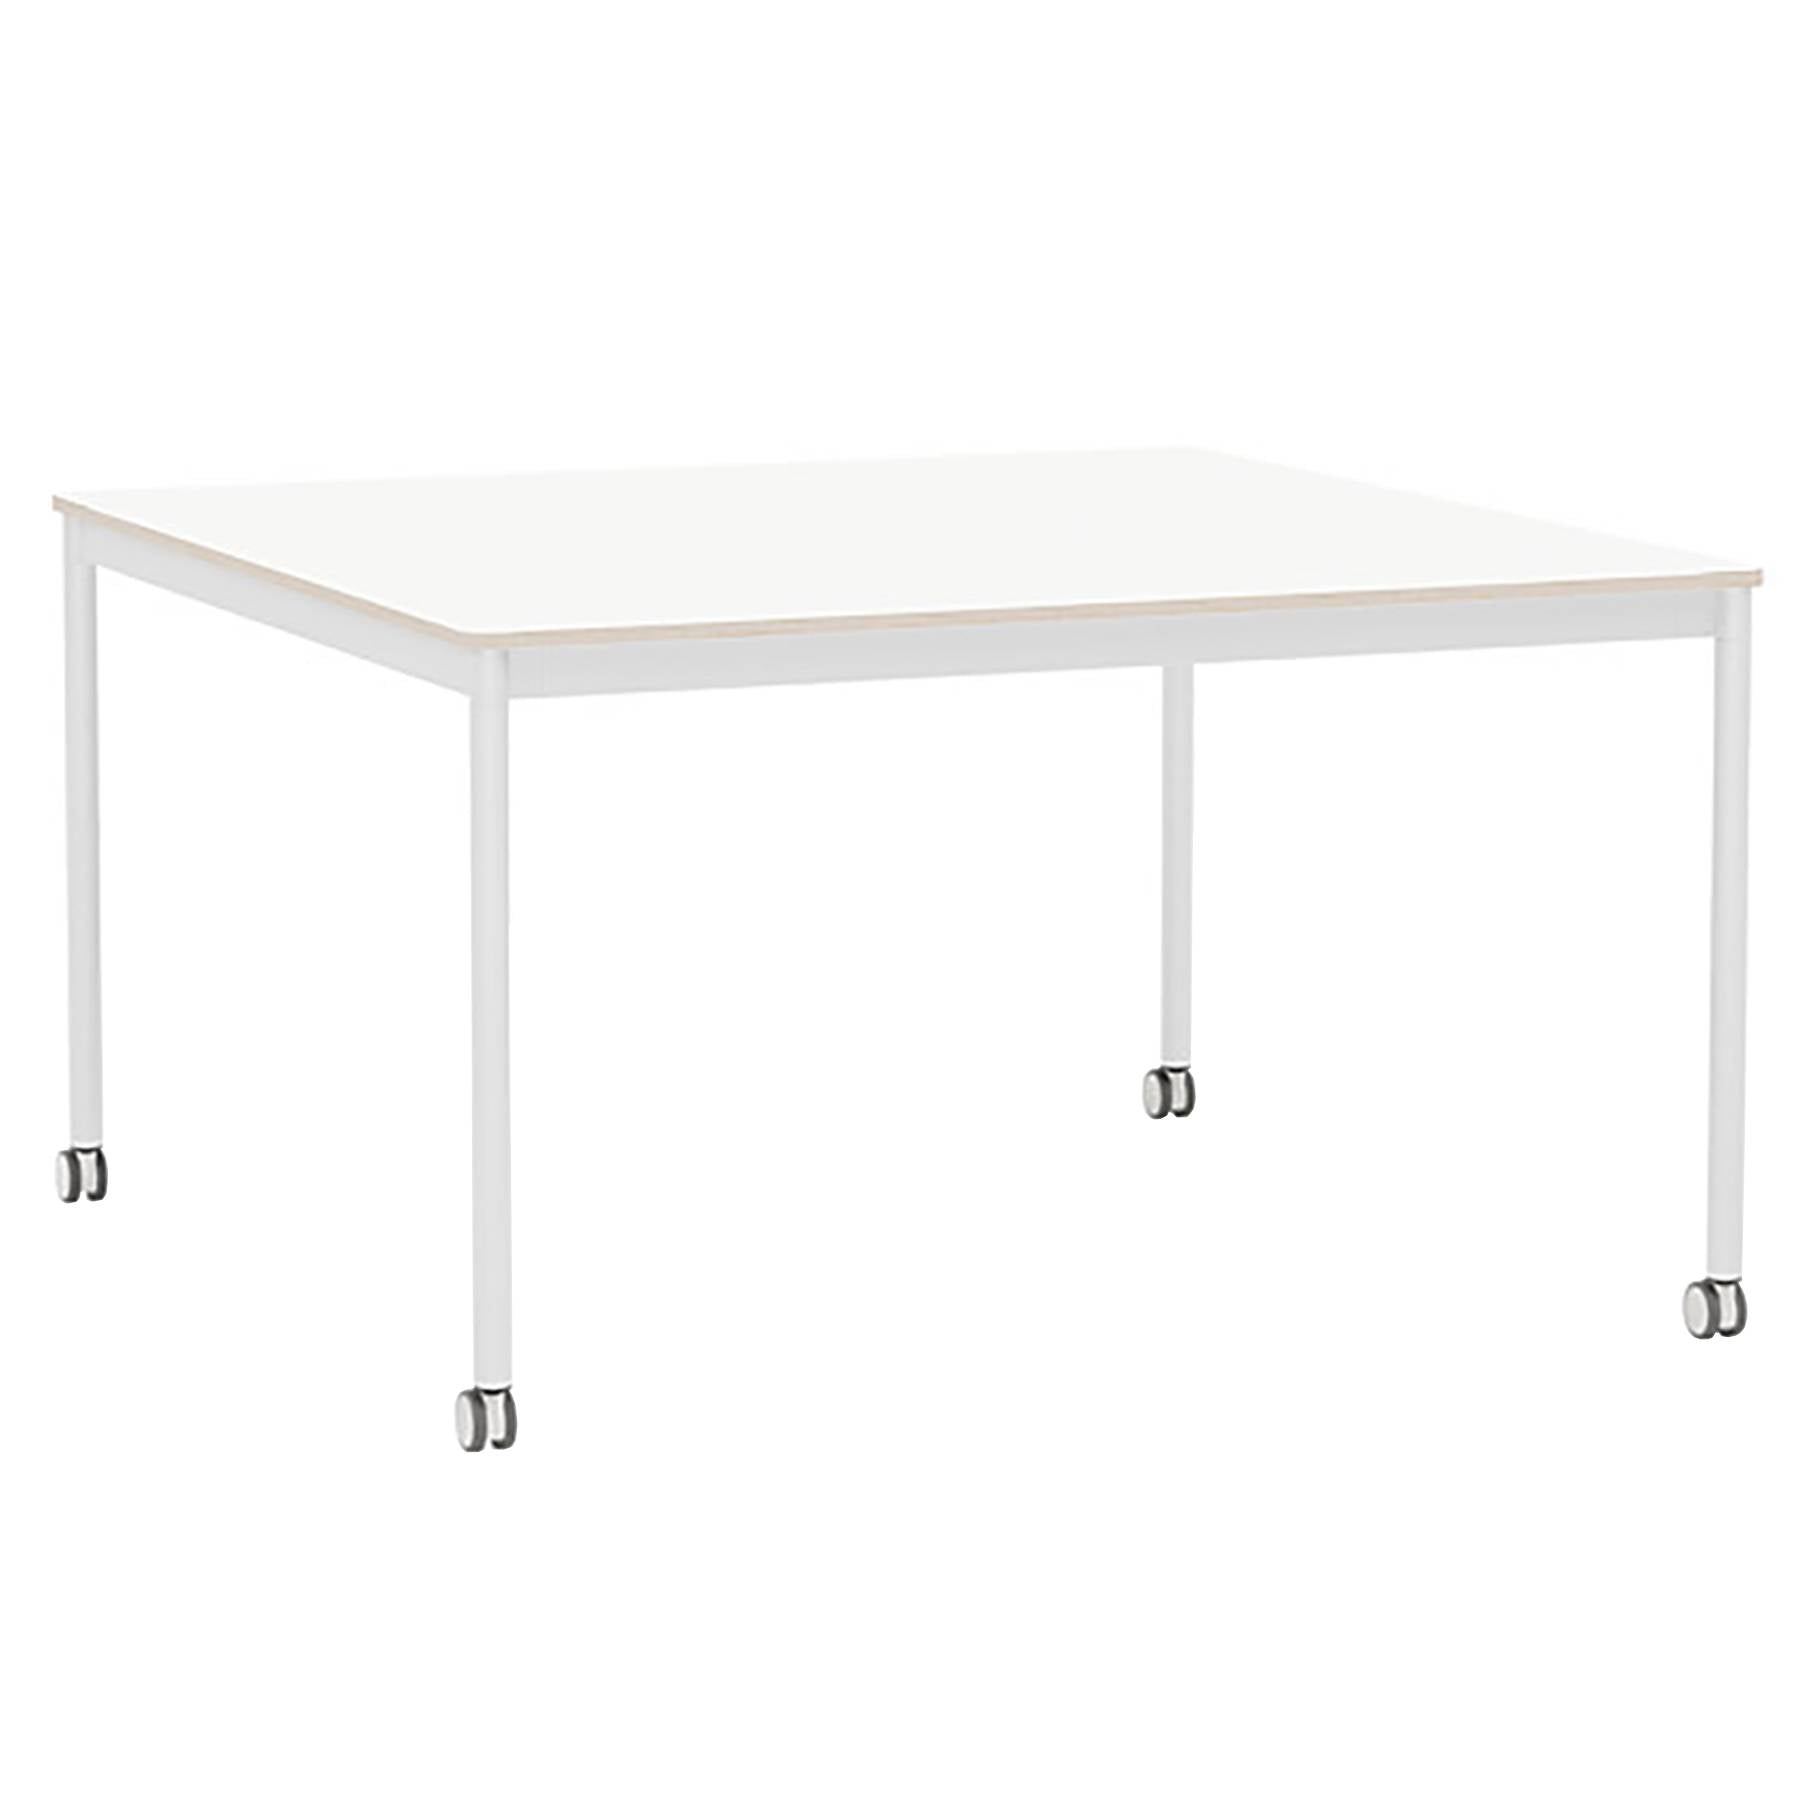 Base Table with Castors: Square + Large - 50.4